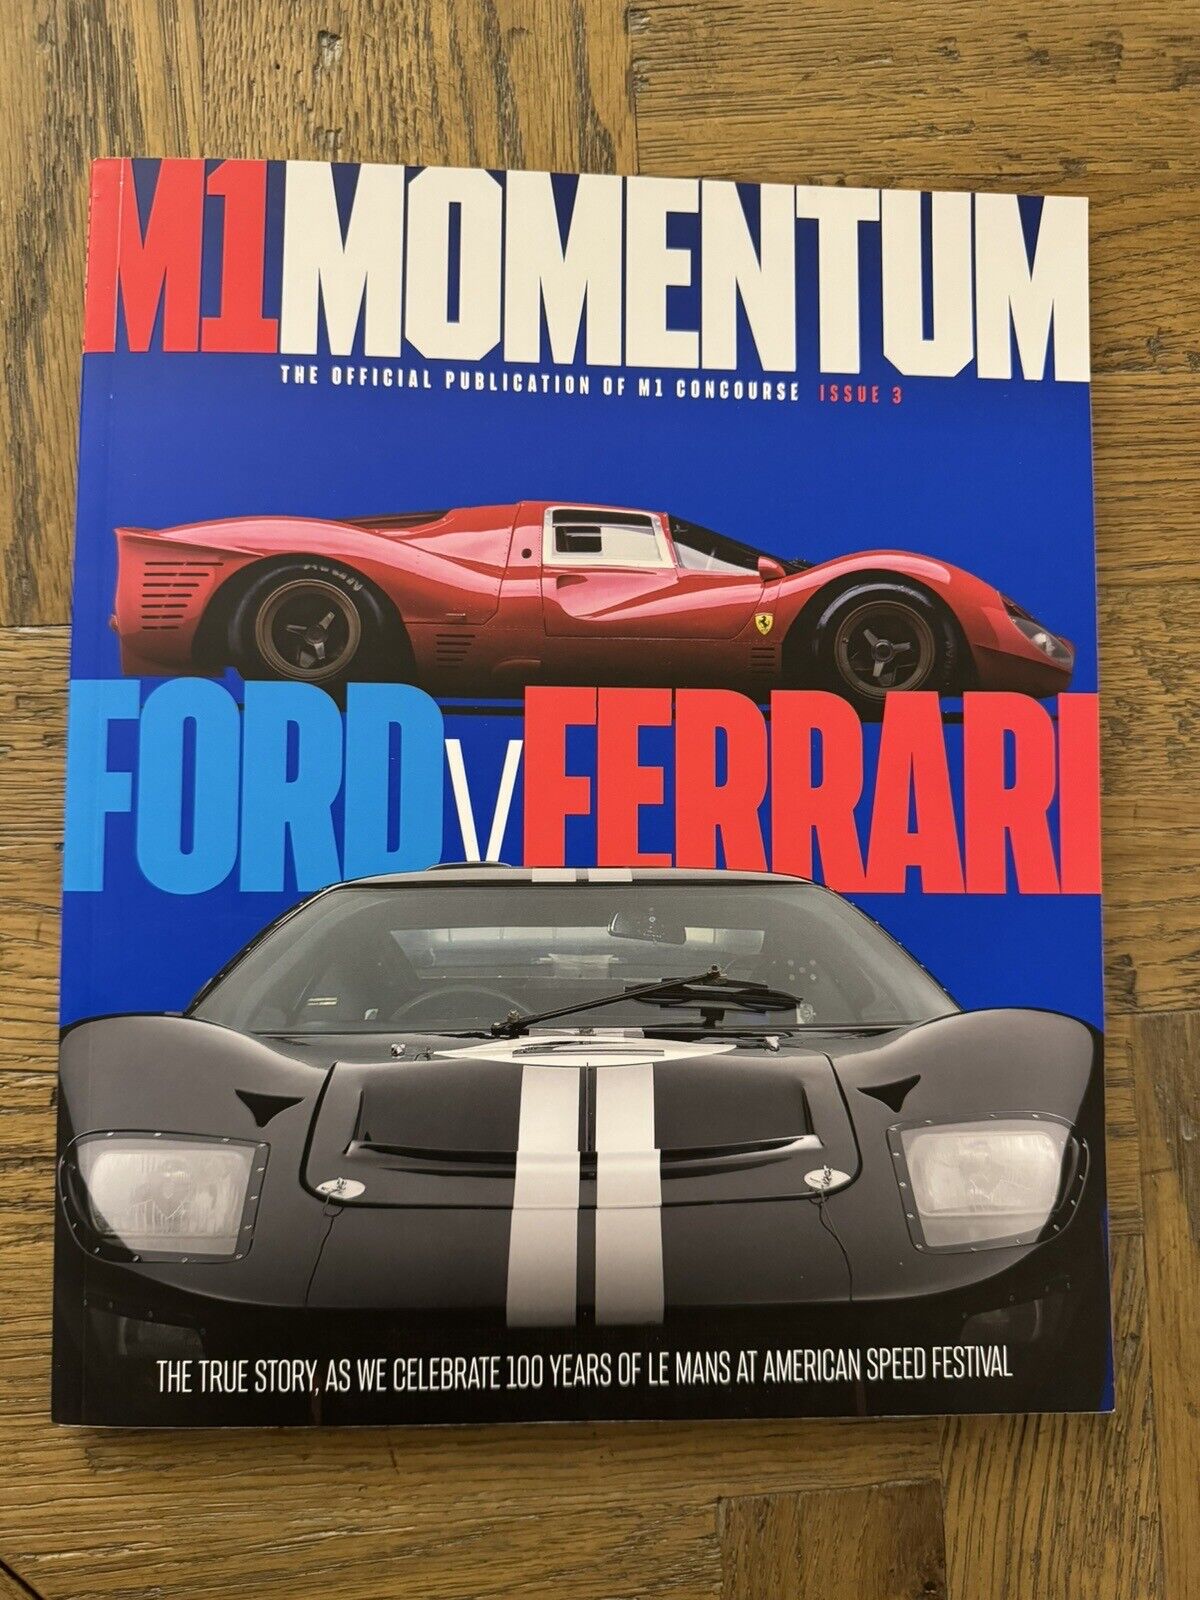 M1 MOMENTUM The Official Publication Of M1 Concourse Issue 3 FORD V FERRARI